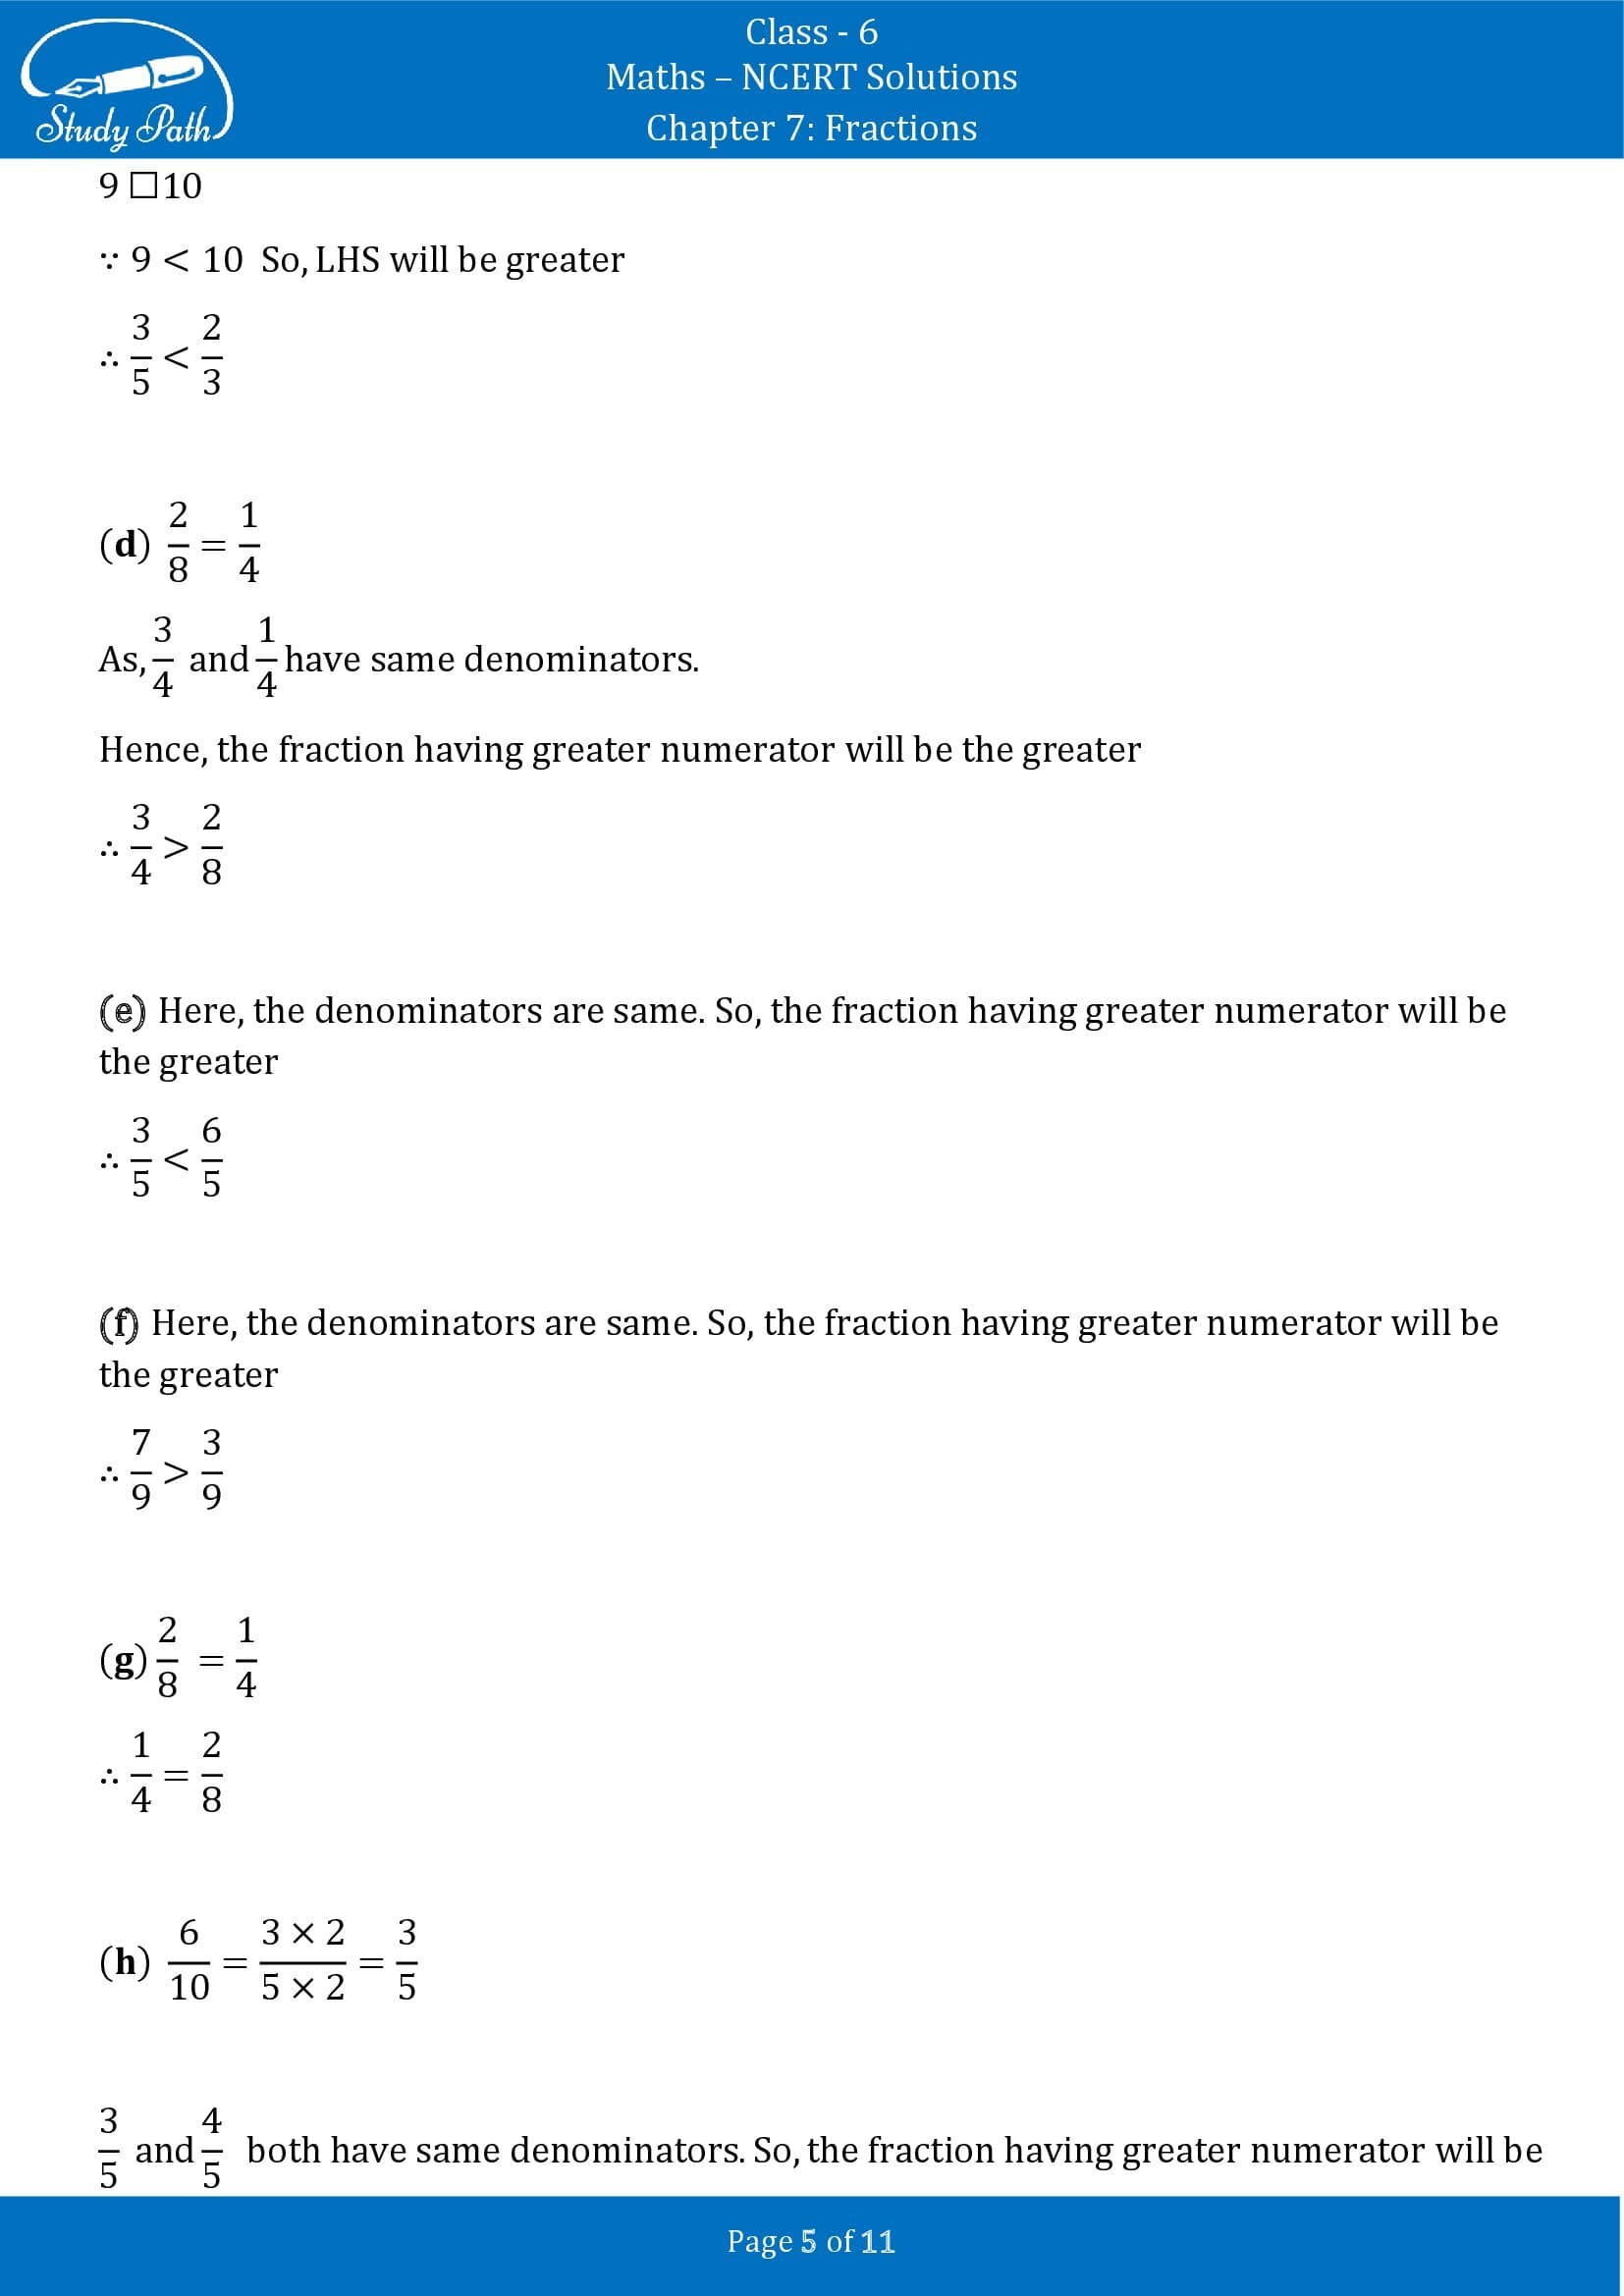 NCERT Solutions for Class 6 Maths Chapter 7 Fractions Exercise 7.4 00005